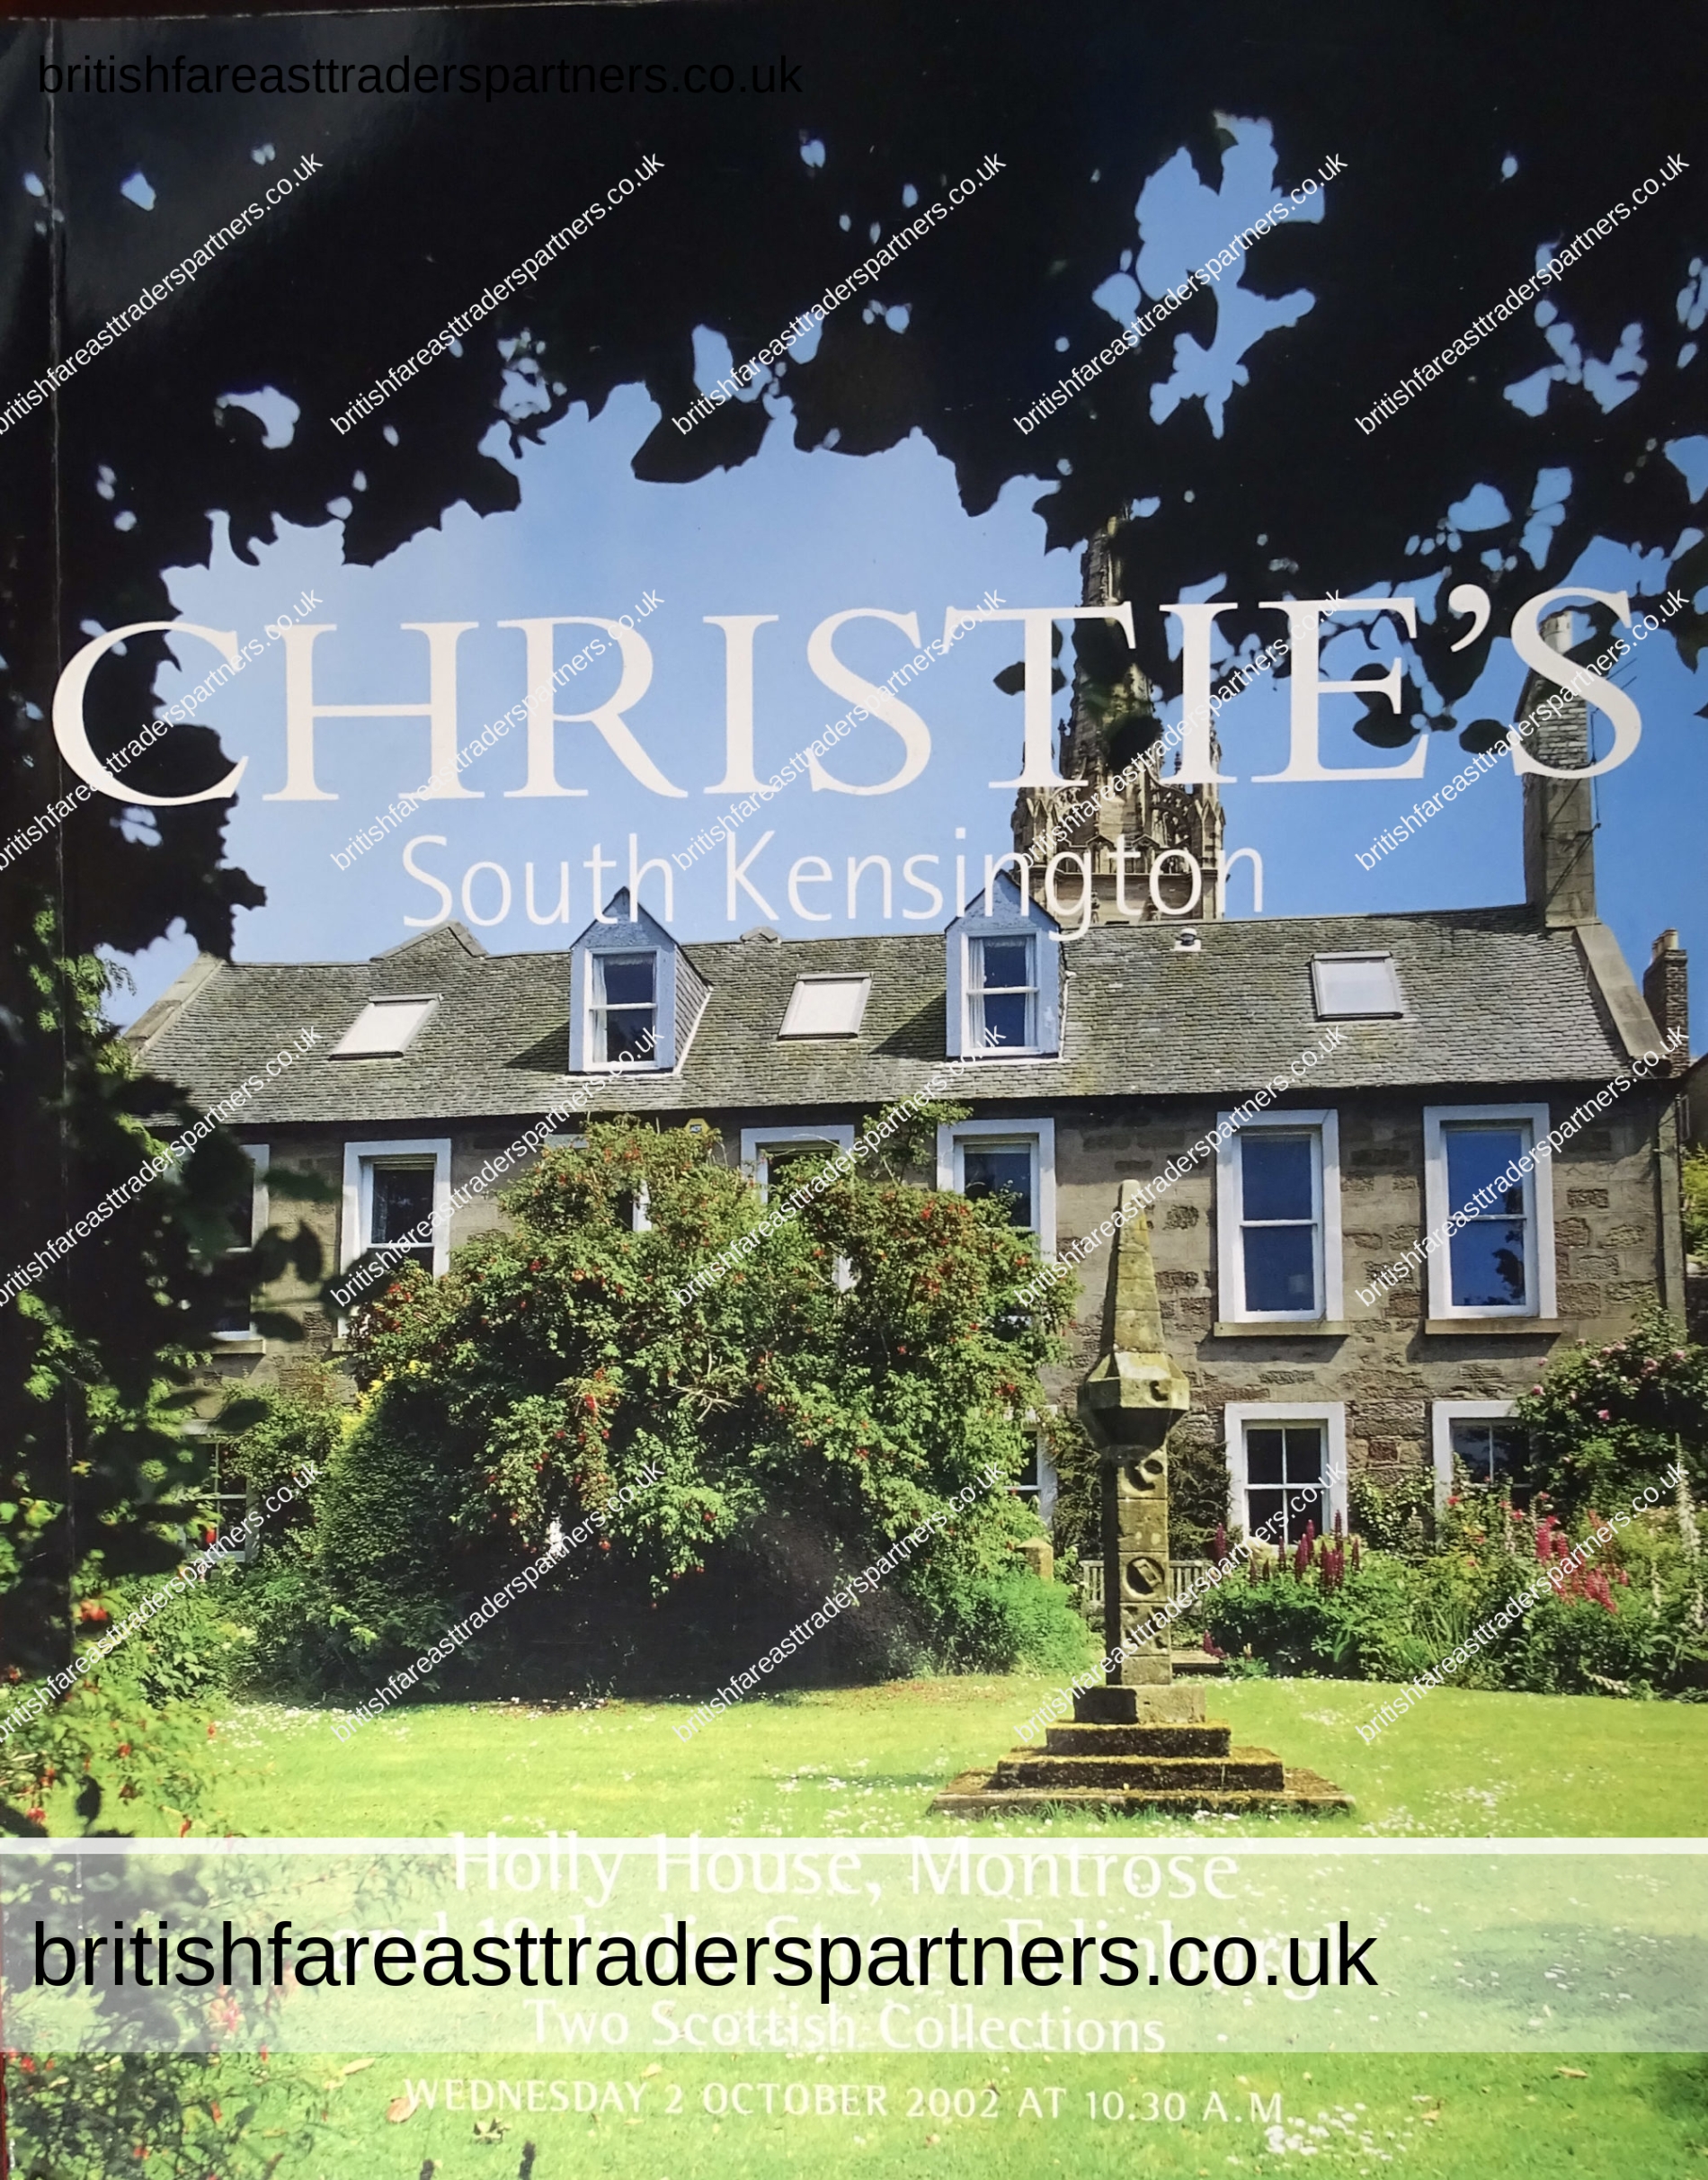 CHRISTIE’S SOUTH KENSINGTON LONDON 2 OCTOBER 2002 TWO SCOTTISH COLLECTIONS HOLLY HOUSE, MONTROSE & 19 INDIA STREET, EDINBURGH PROPERTIES of the Late DAVID R. SOMERVELL Esq and a GENTLEMAN AUCTION Catalogue